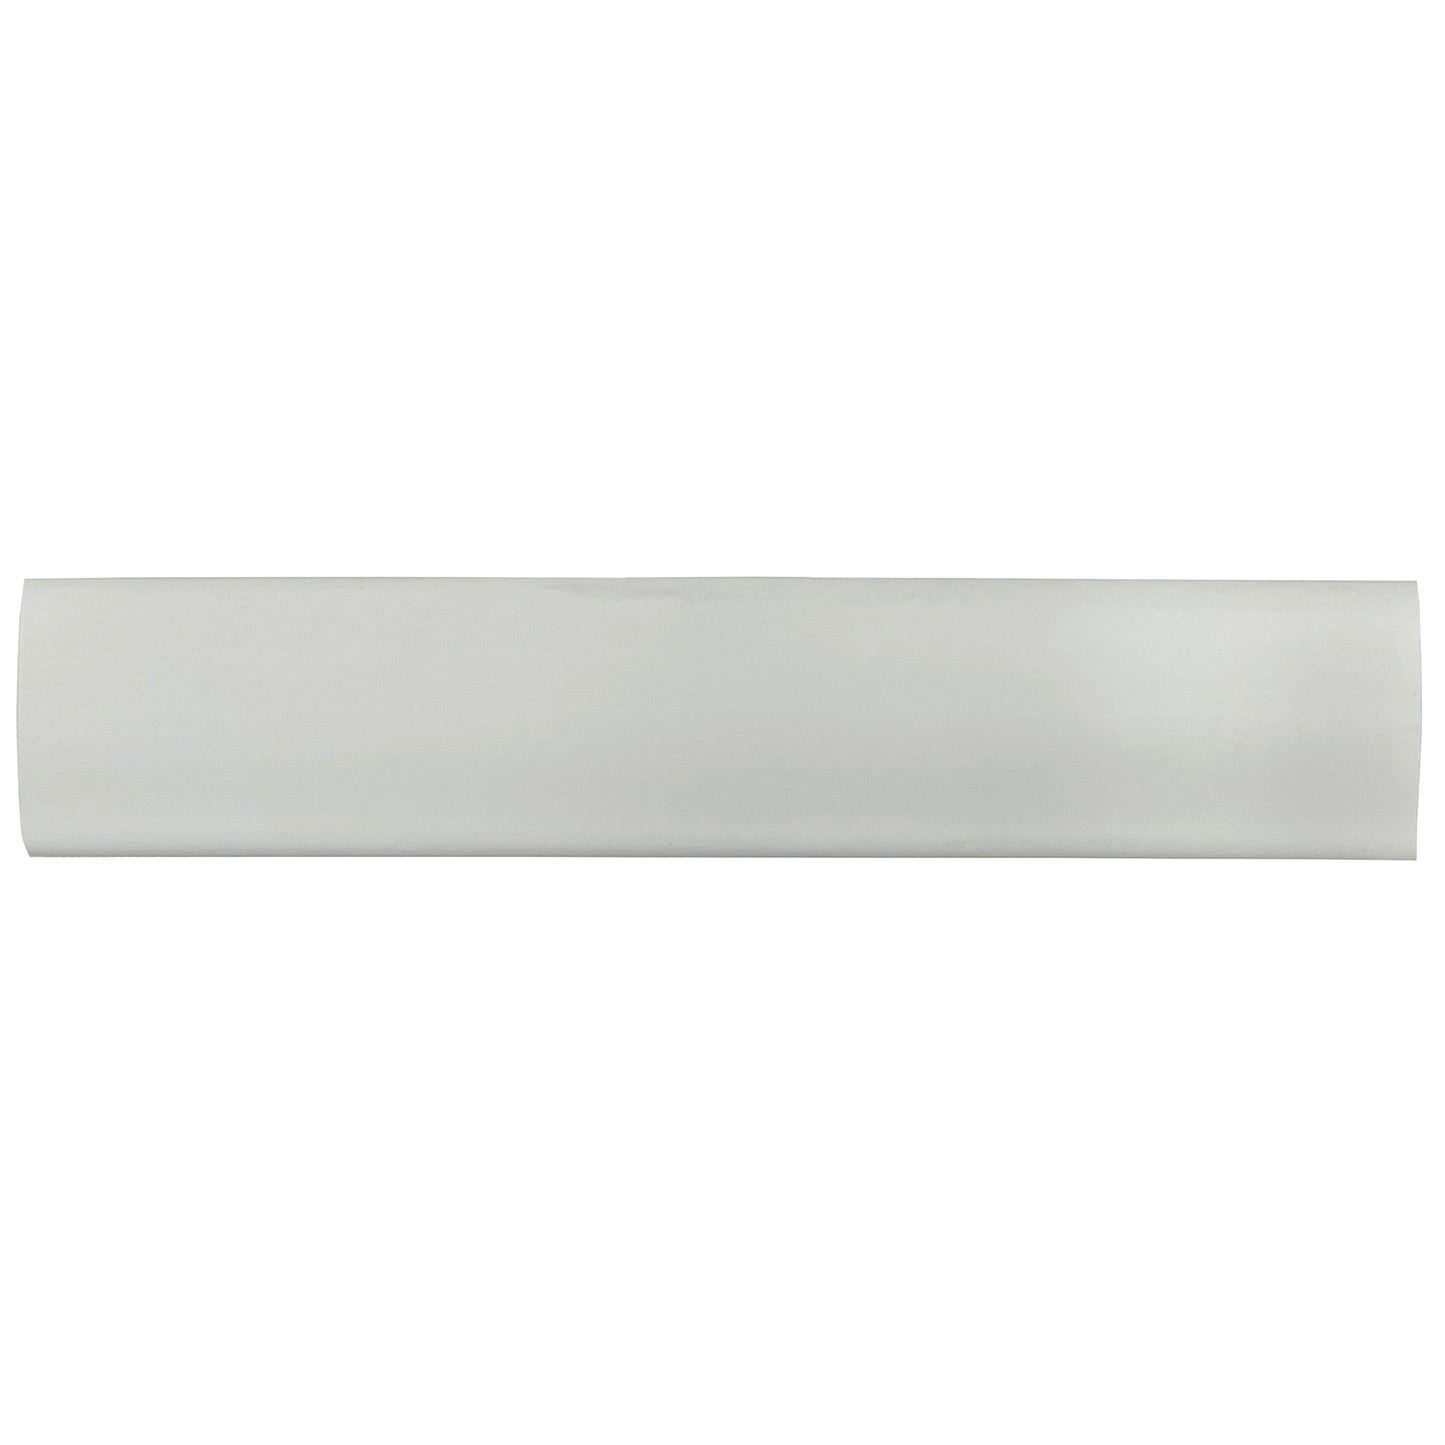 Flexible Thin Single Wall Non-Adhesive Heat Shrink Tubing 2:1 White 3/4" ID - 12" Inch 10 Pack